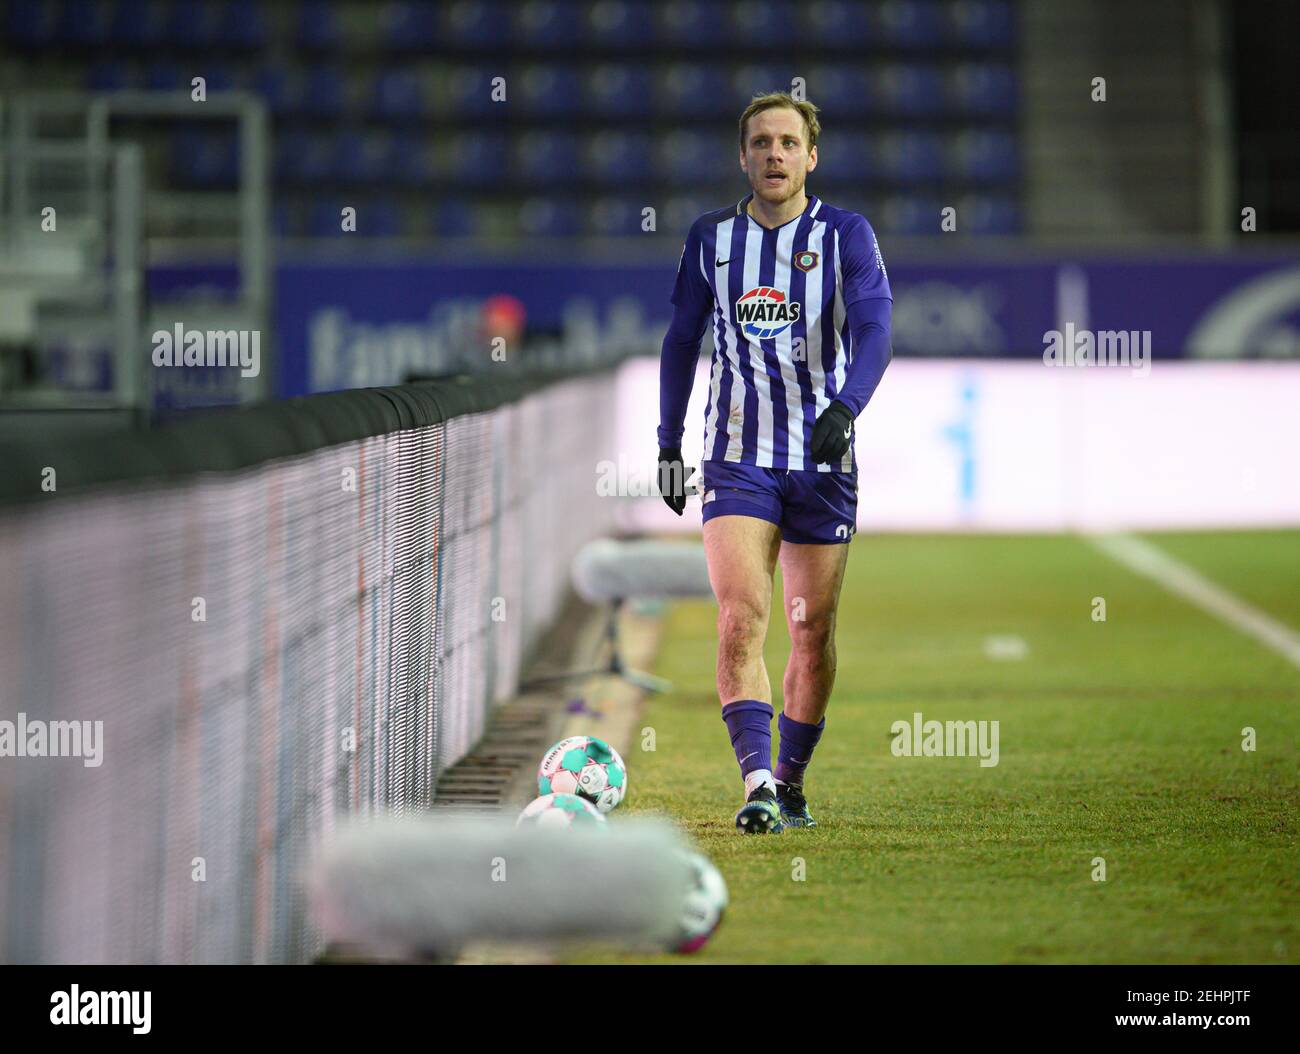 Aue, Germany. 19th Feb, 2021. Football: 2. Bundesliga, FC Erzgebirge Aue - VfL Bochum, Matchday 22, at Erzgebirgsstadion. Aue's Ben Zolinski runs along the sidelines after his substitution. Credit: Robert Michael/dpa-Zentralbild/dpa - IMPORTANT NOTE: In accordance with the regulations of the DFL Deutsche Fußball Liga and/or the DFB Deutscher Fußball-Bund, it is prohibited to use or have used photographs taken in the stadium and/or of the match in the form of sequence pictures and/or video-like photo series./dpa/Alamy Live News Stock Photo